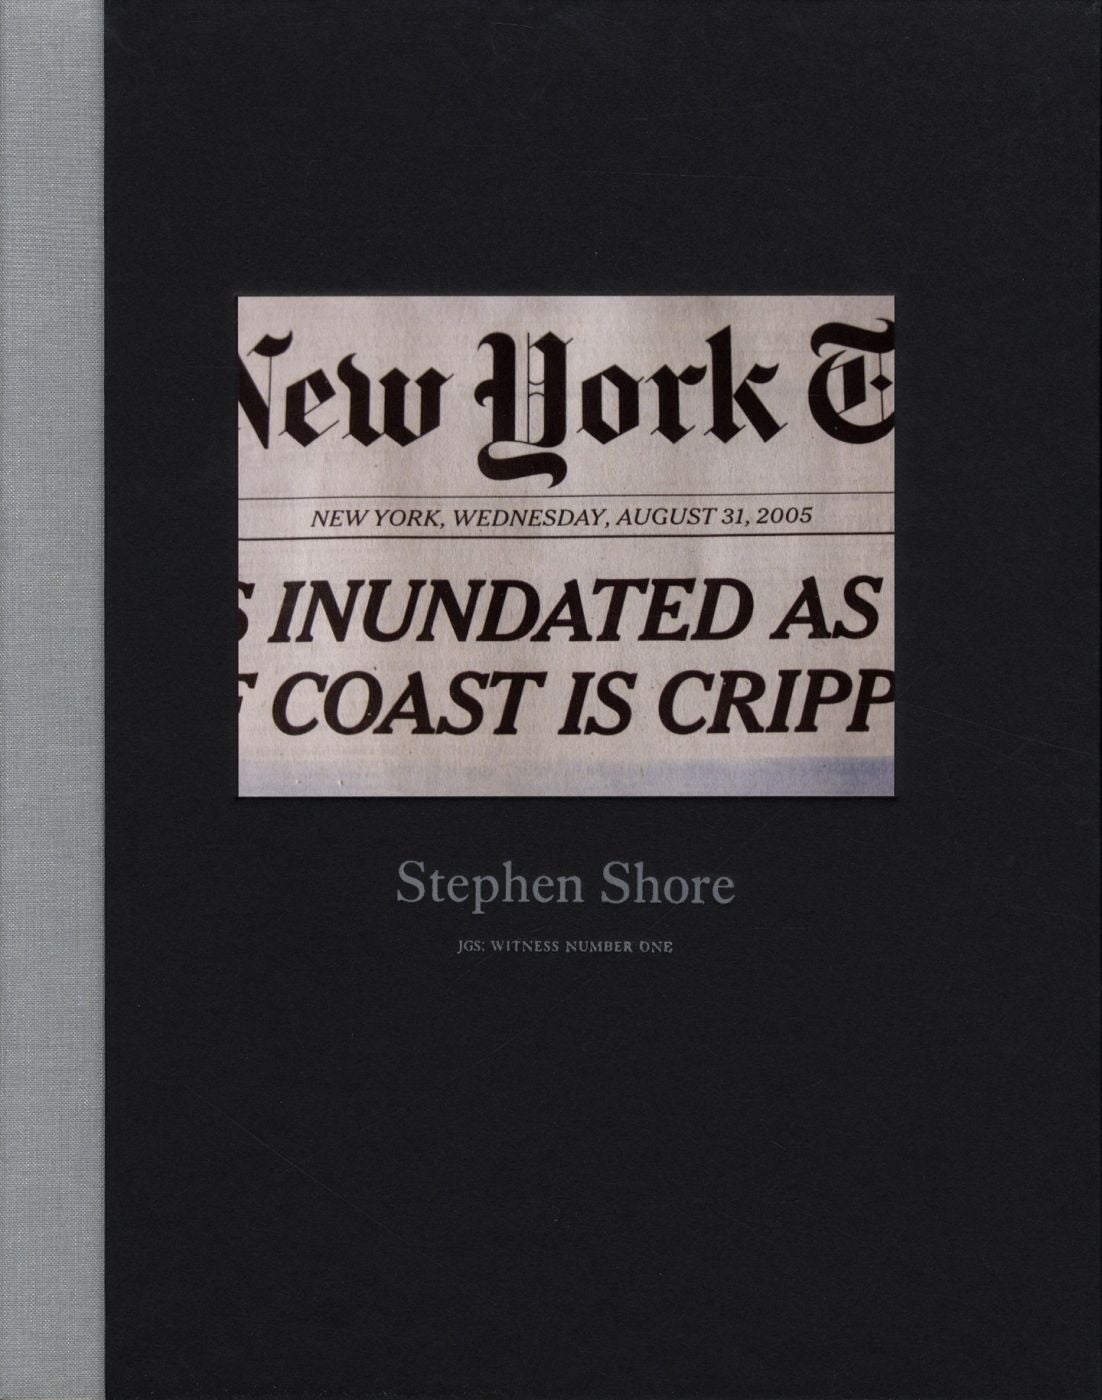 Witness #1 (Number One): Stephen Shore [SIGNED by Stephen Shore]